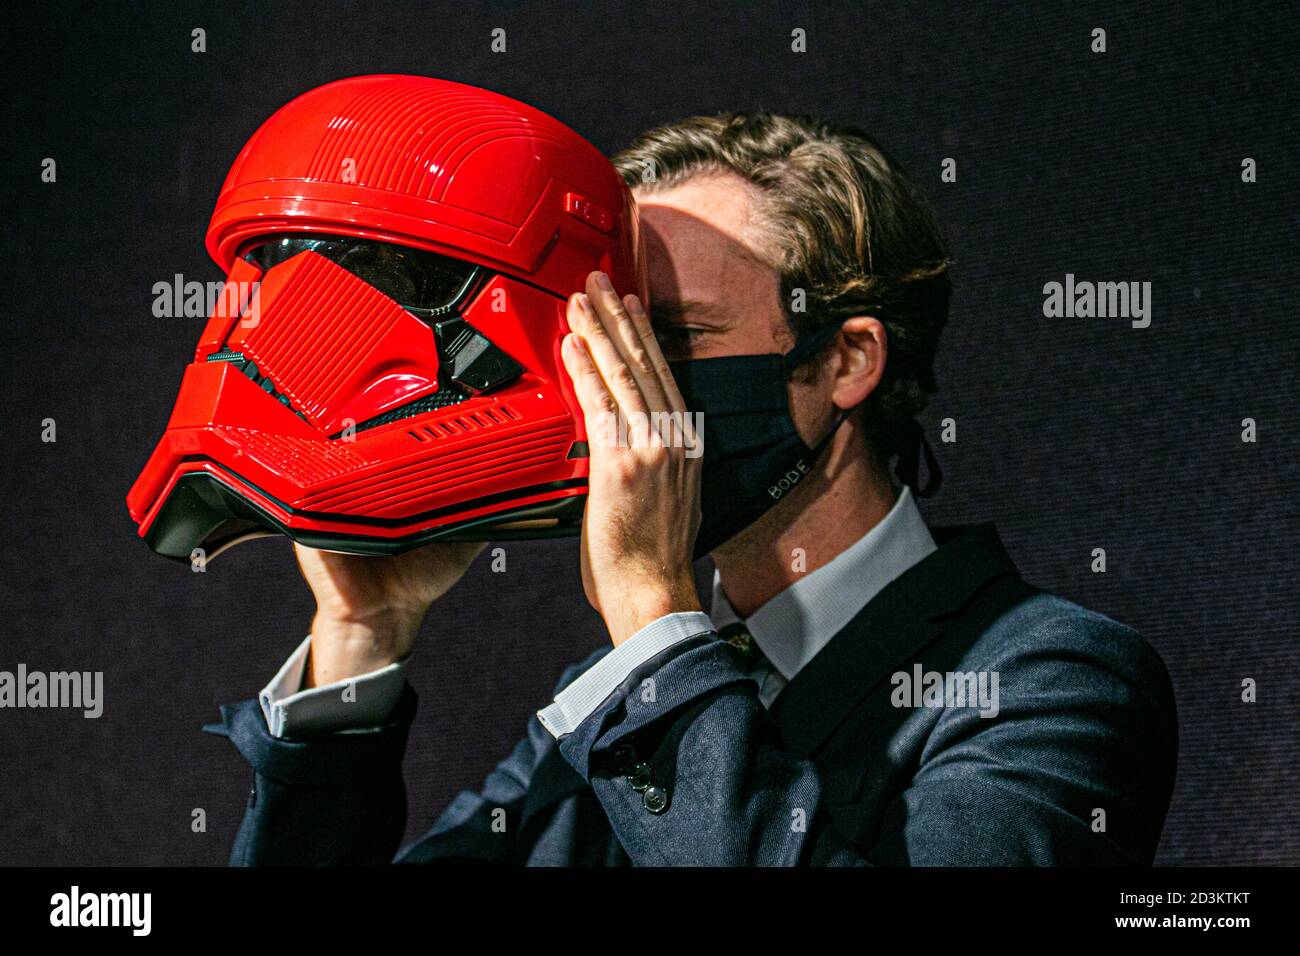 Sold at Auction: Louis Vuitton Motorcycle Helmet